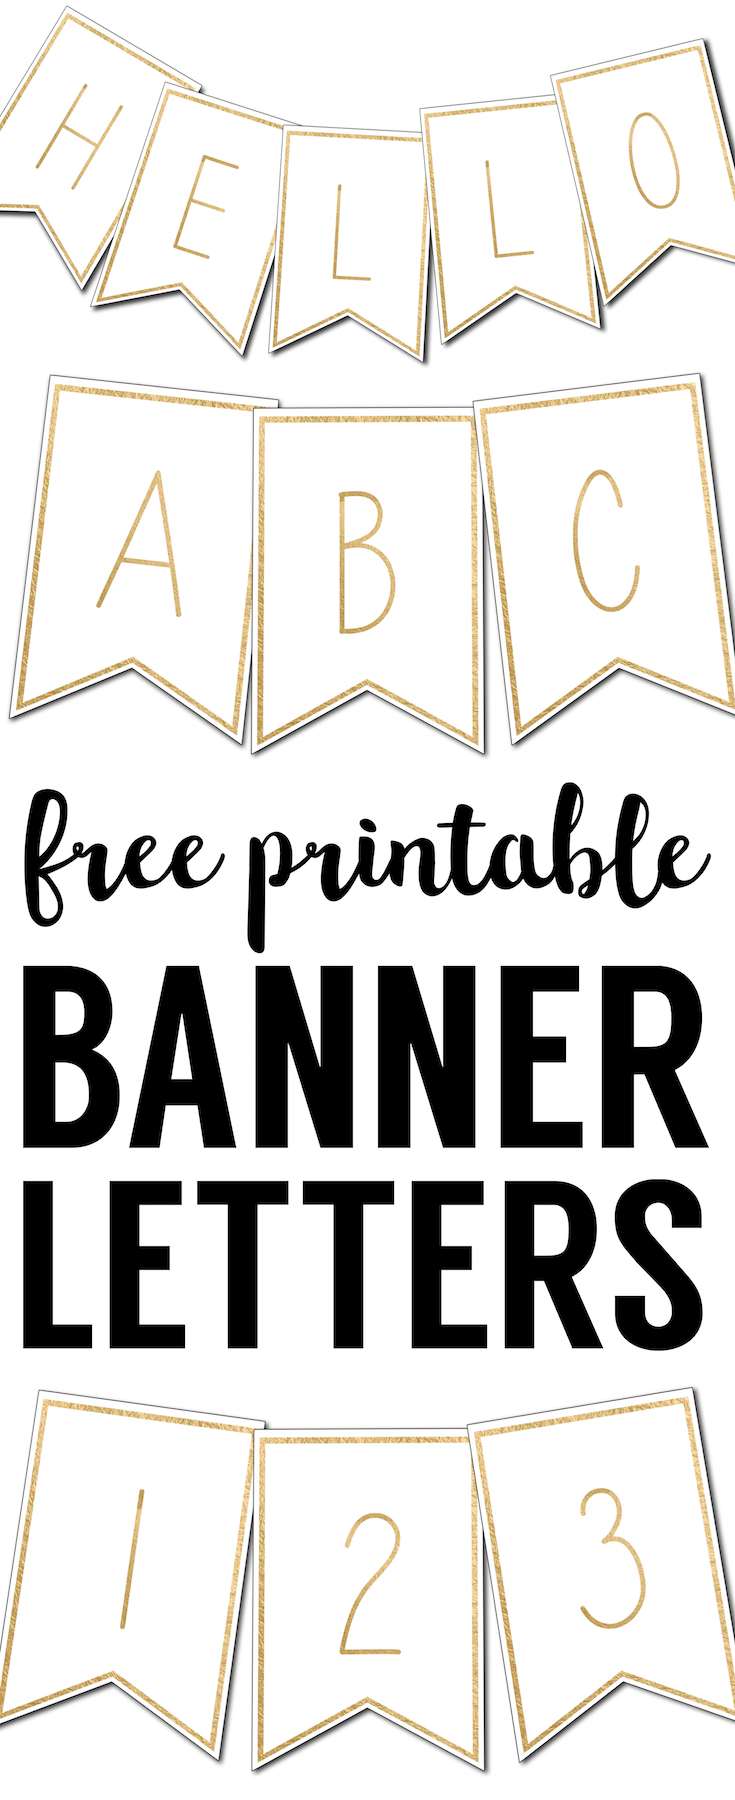 Free Printable Banner Letters Templates | Paper Trail Design